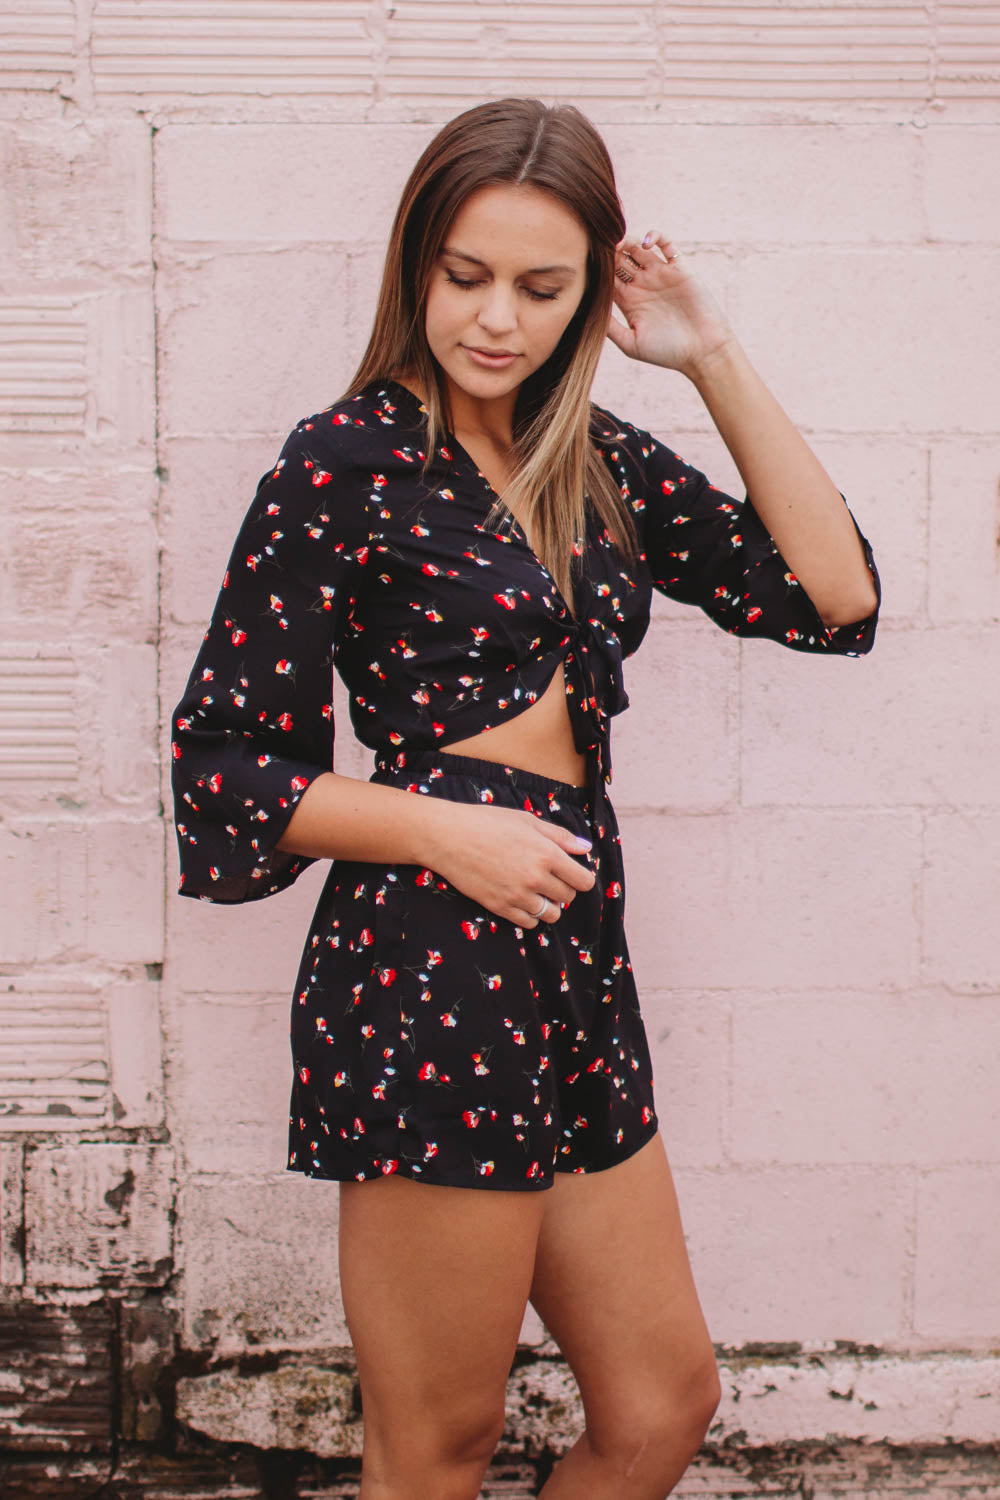 Romper - 3/4 Sleeve Floral Romper with Front Tie